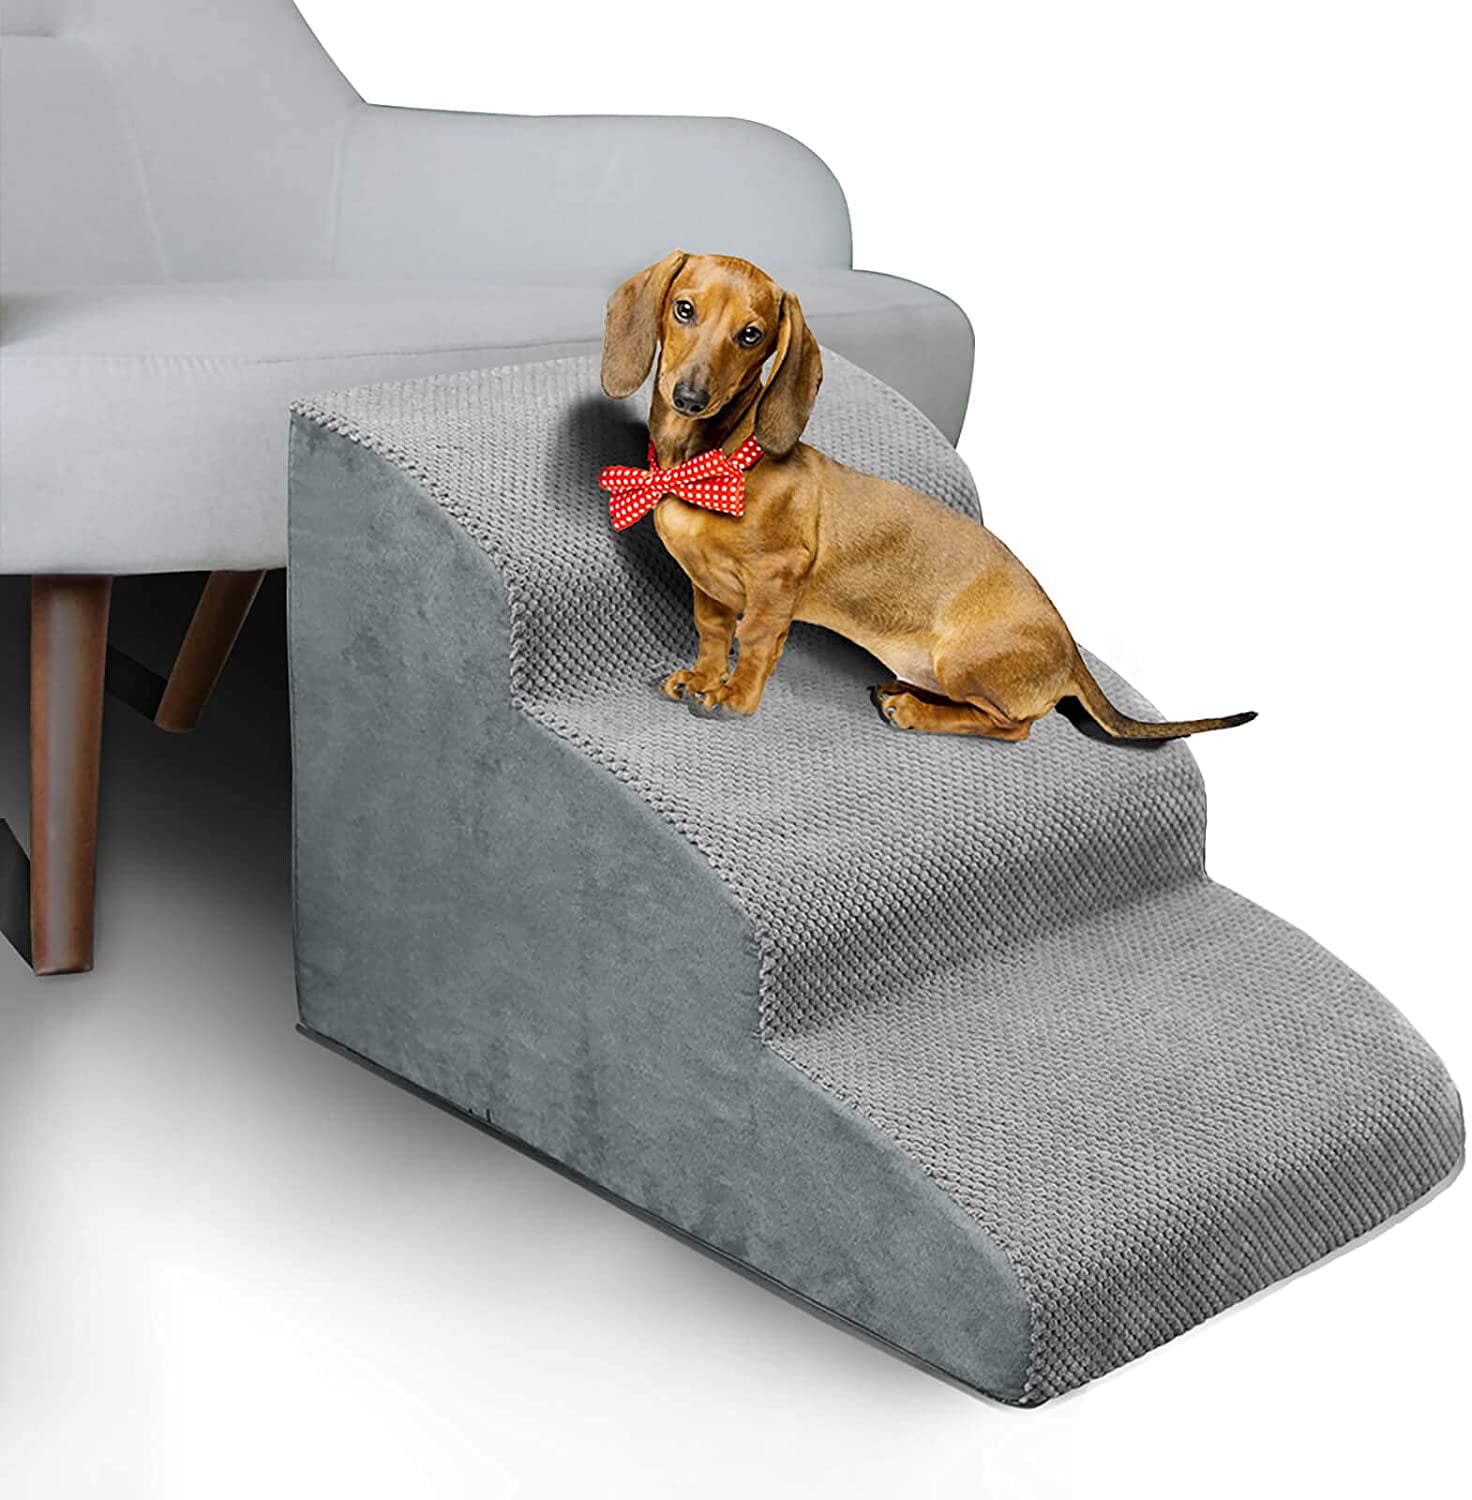 Foldable Washable Removable Cover Dog Stuff Ideal for Couch Chair Furniture Car A.FATI Dog Folding Steps Stairs 3-Step for High Bed with Foam &Storage Compartment Puppy Supplies 